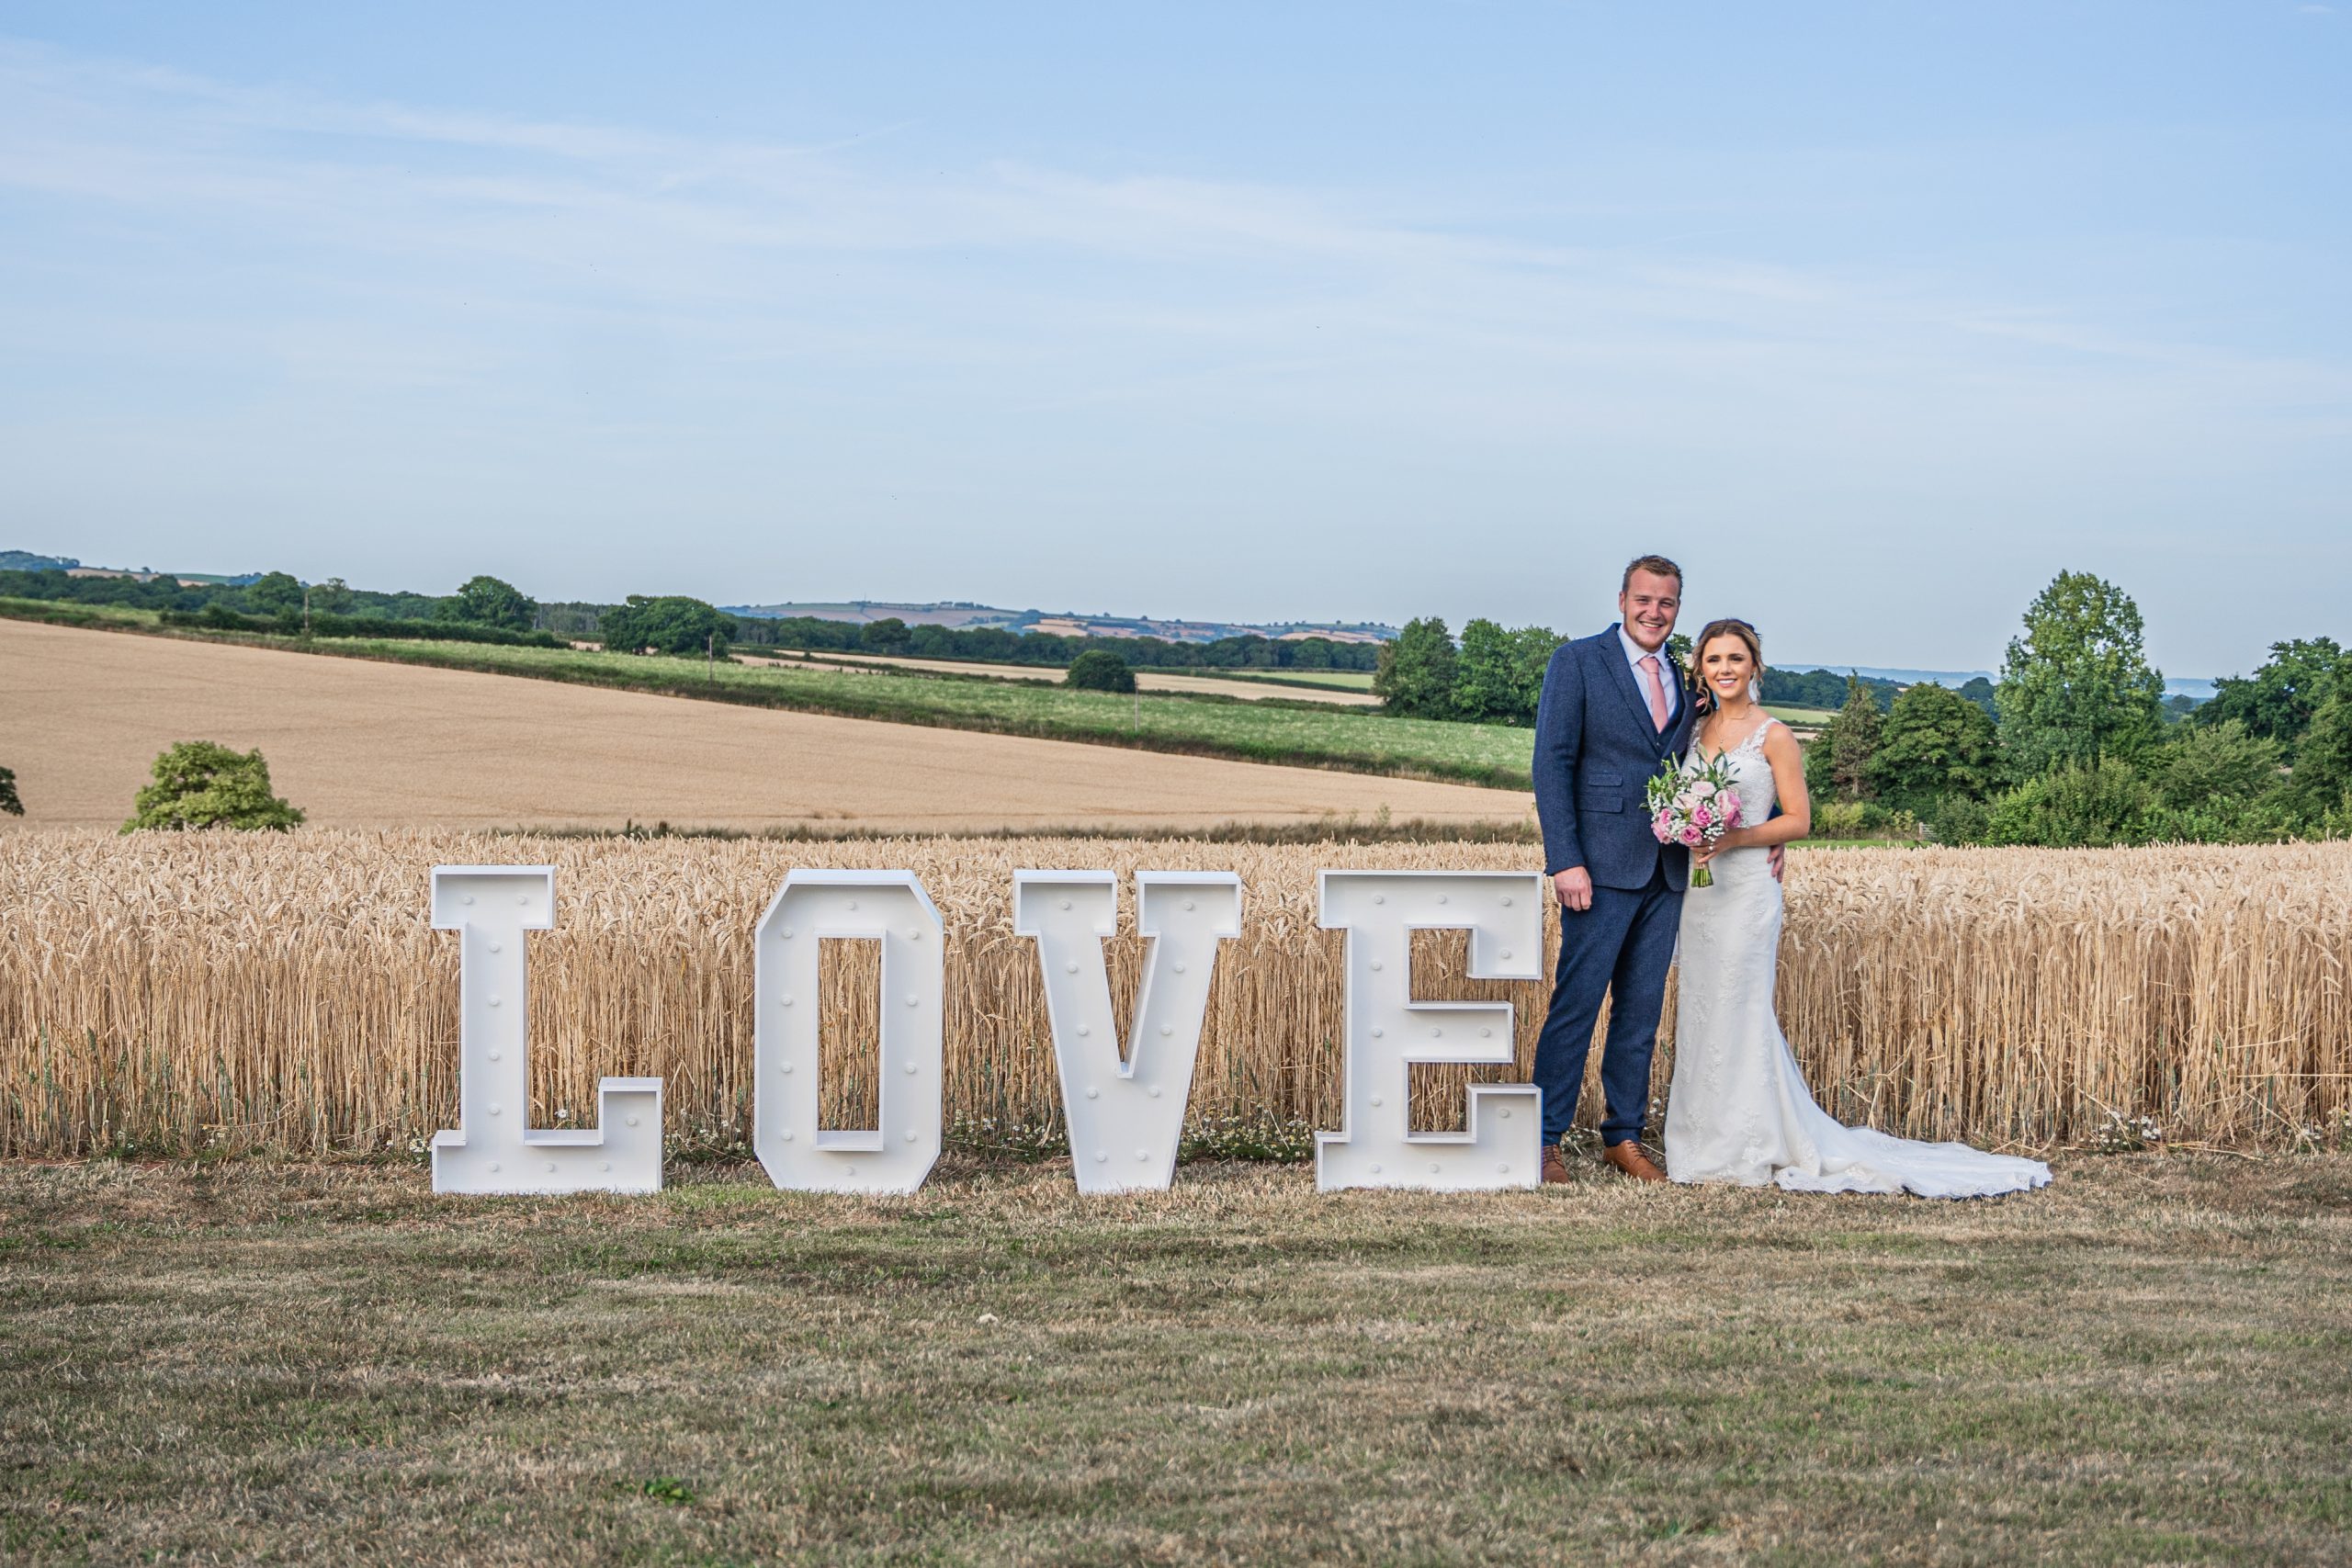 Harvest views with Ben and Becca standing by some giant love letters